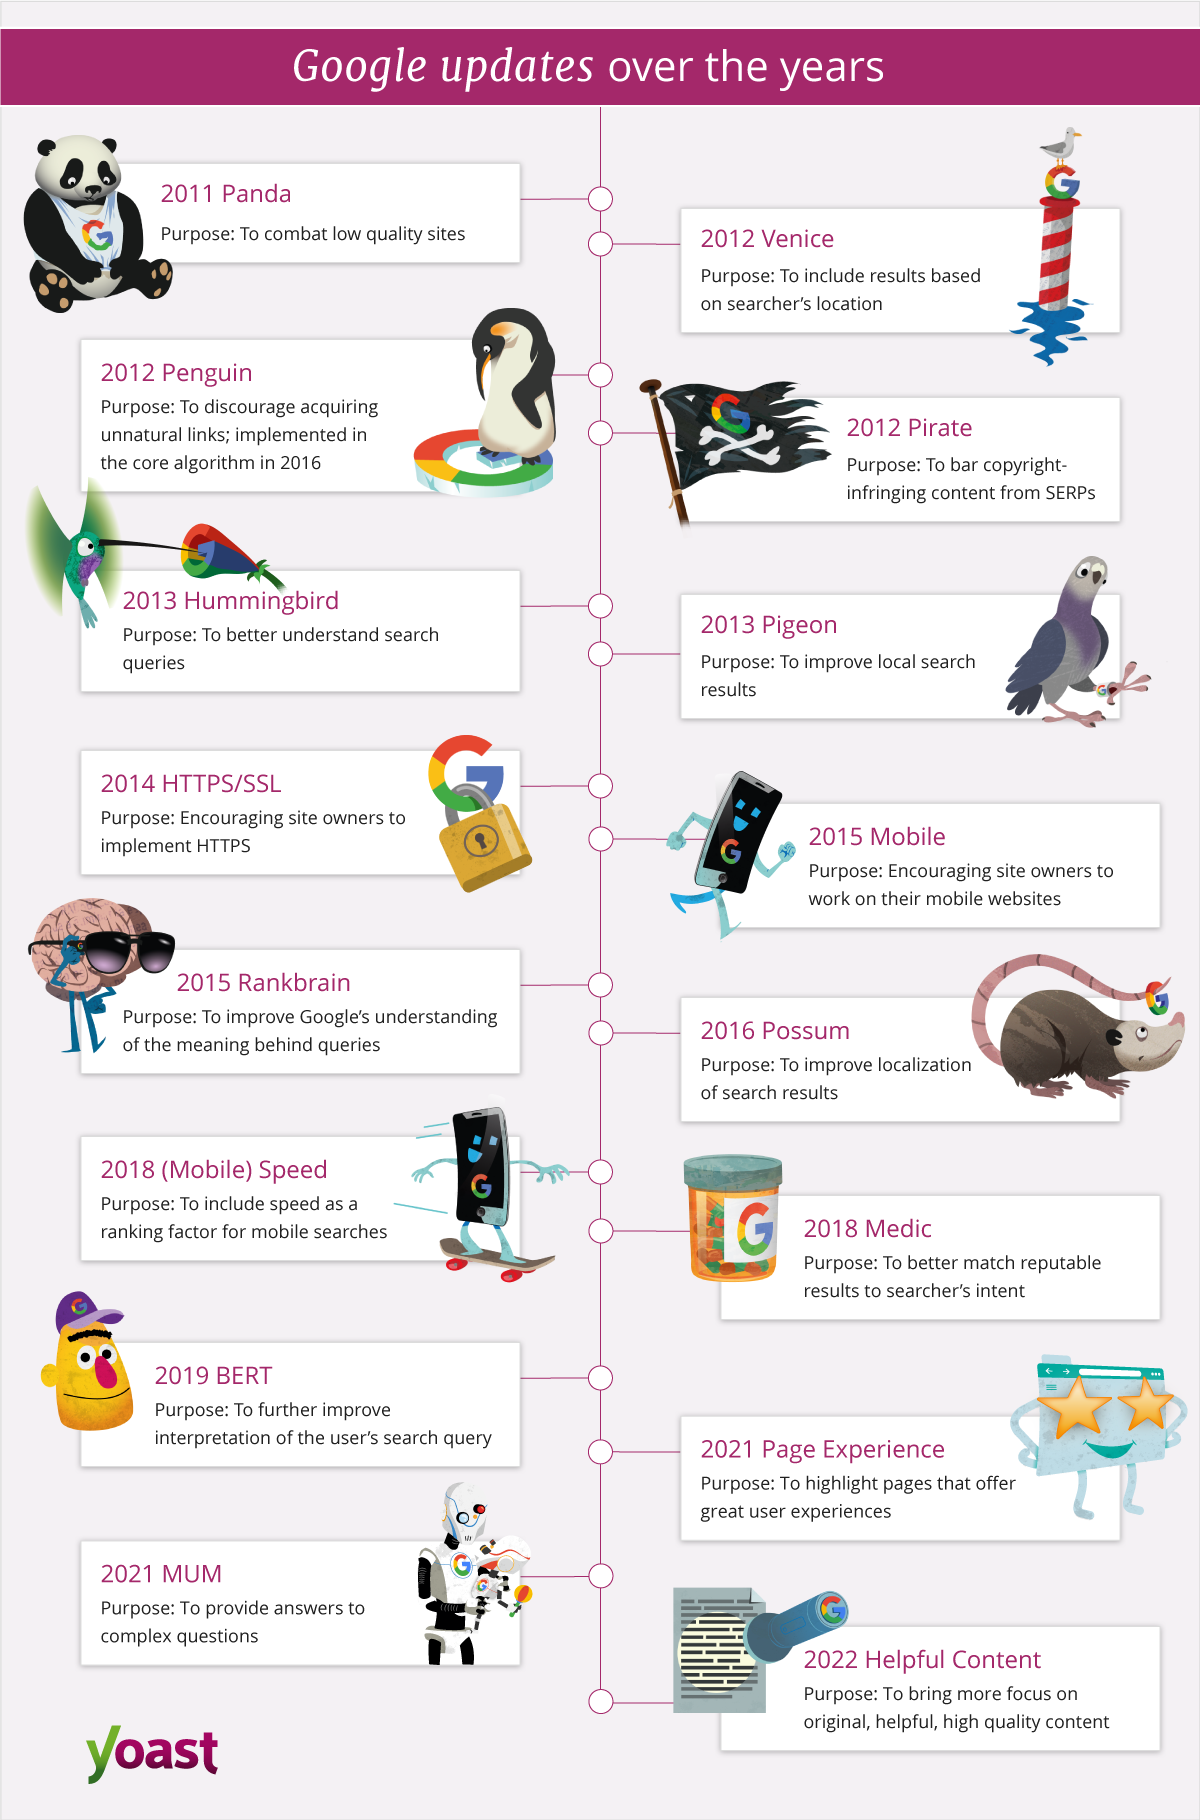 An infographic showing a timeline of Google's algorithm updates